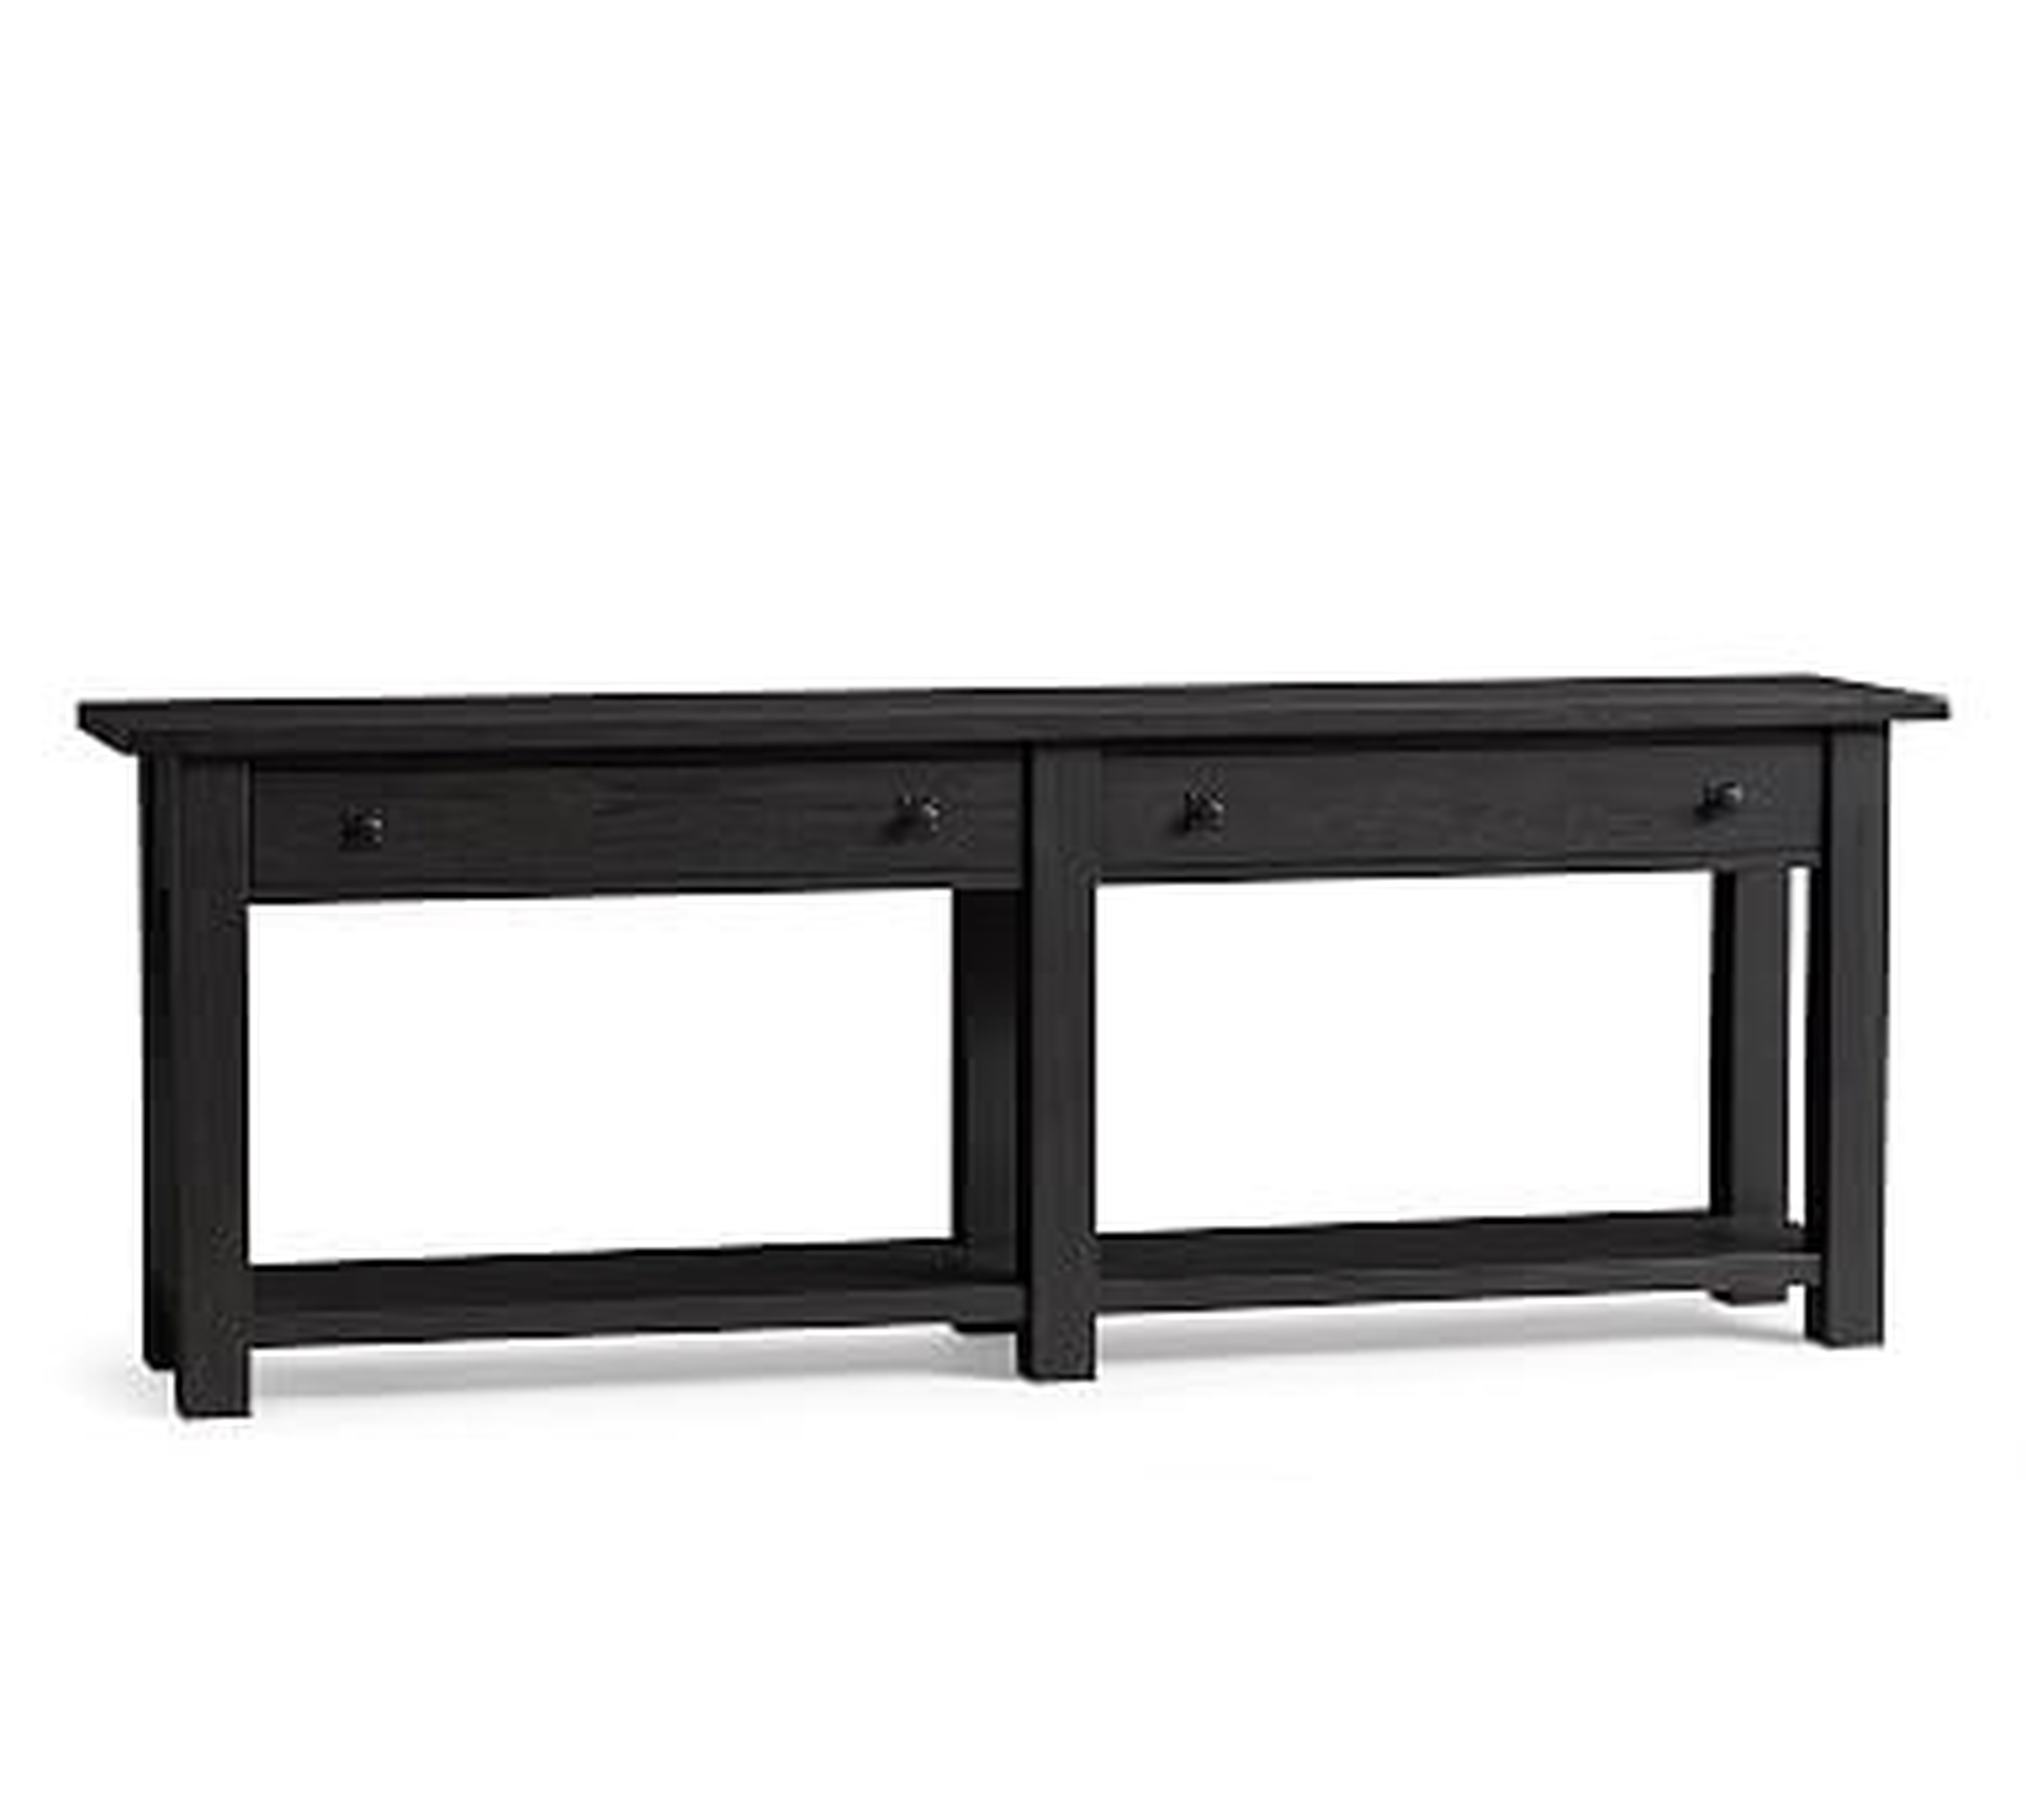 Benchwright 83" Wood Console Table with Drawers, Blackened Oak - Pottery Barn